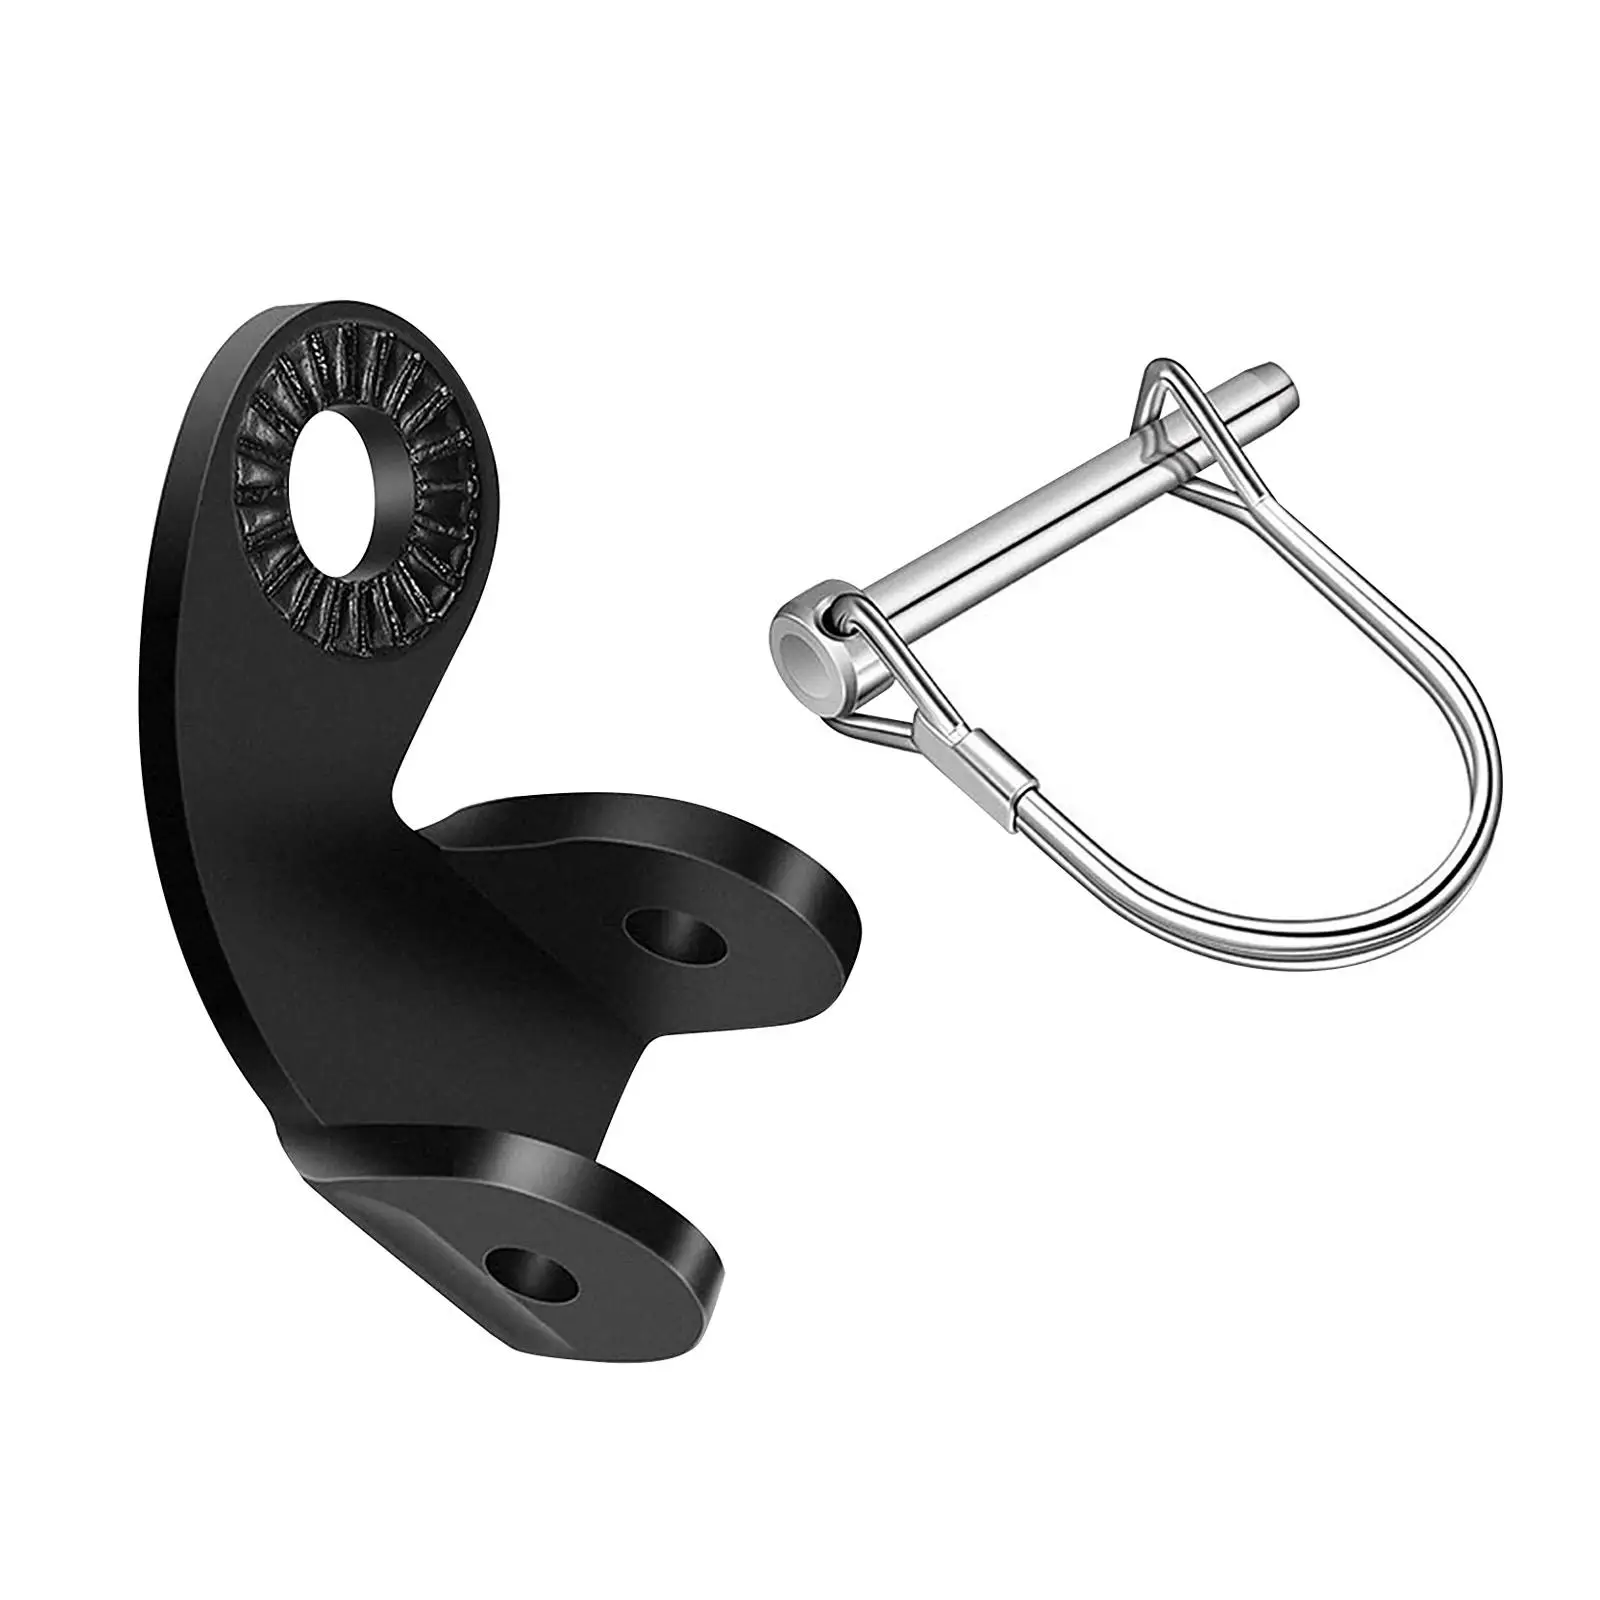 Bike Trailer Hitch Steel Adapter for Strollers Bicycle Trailer Coupler